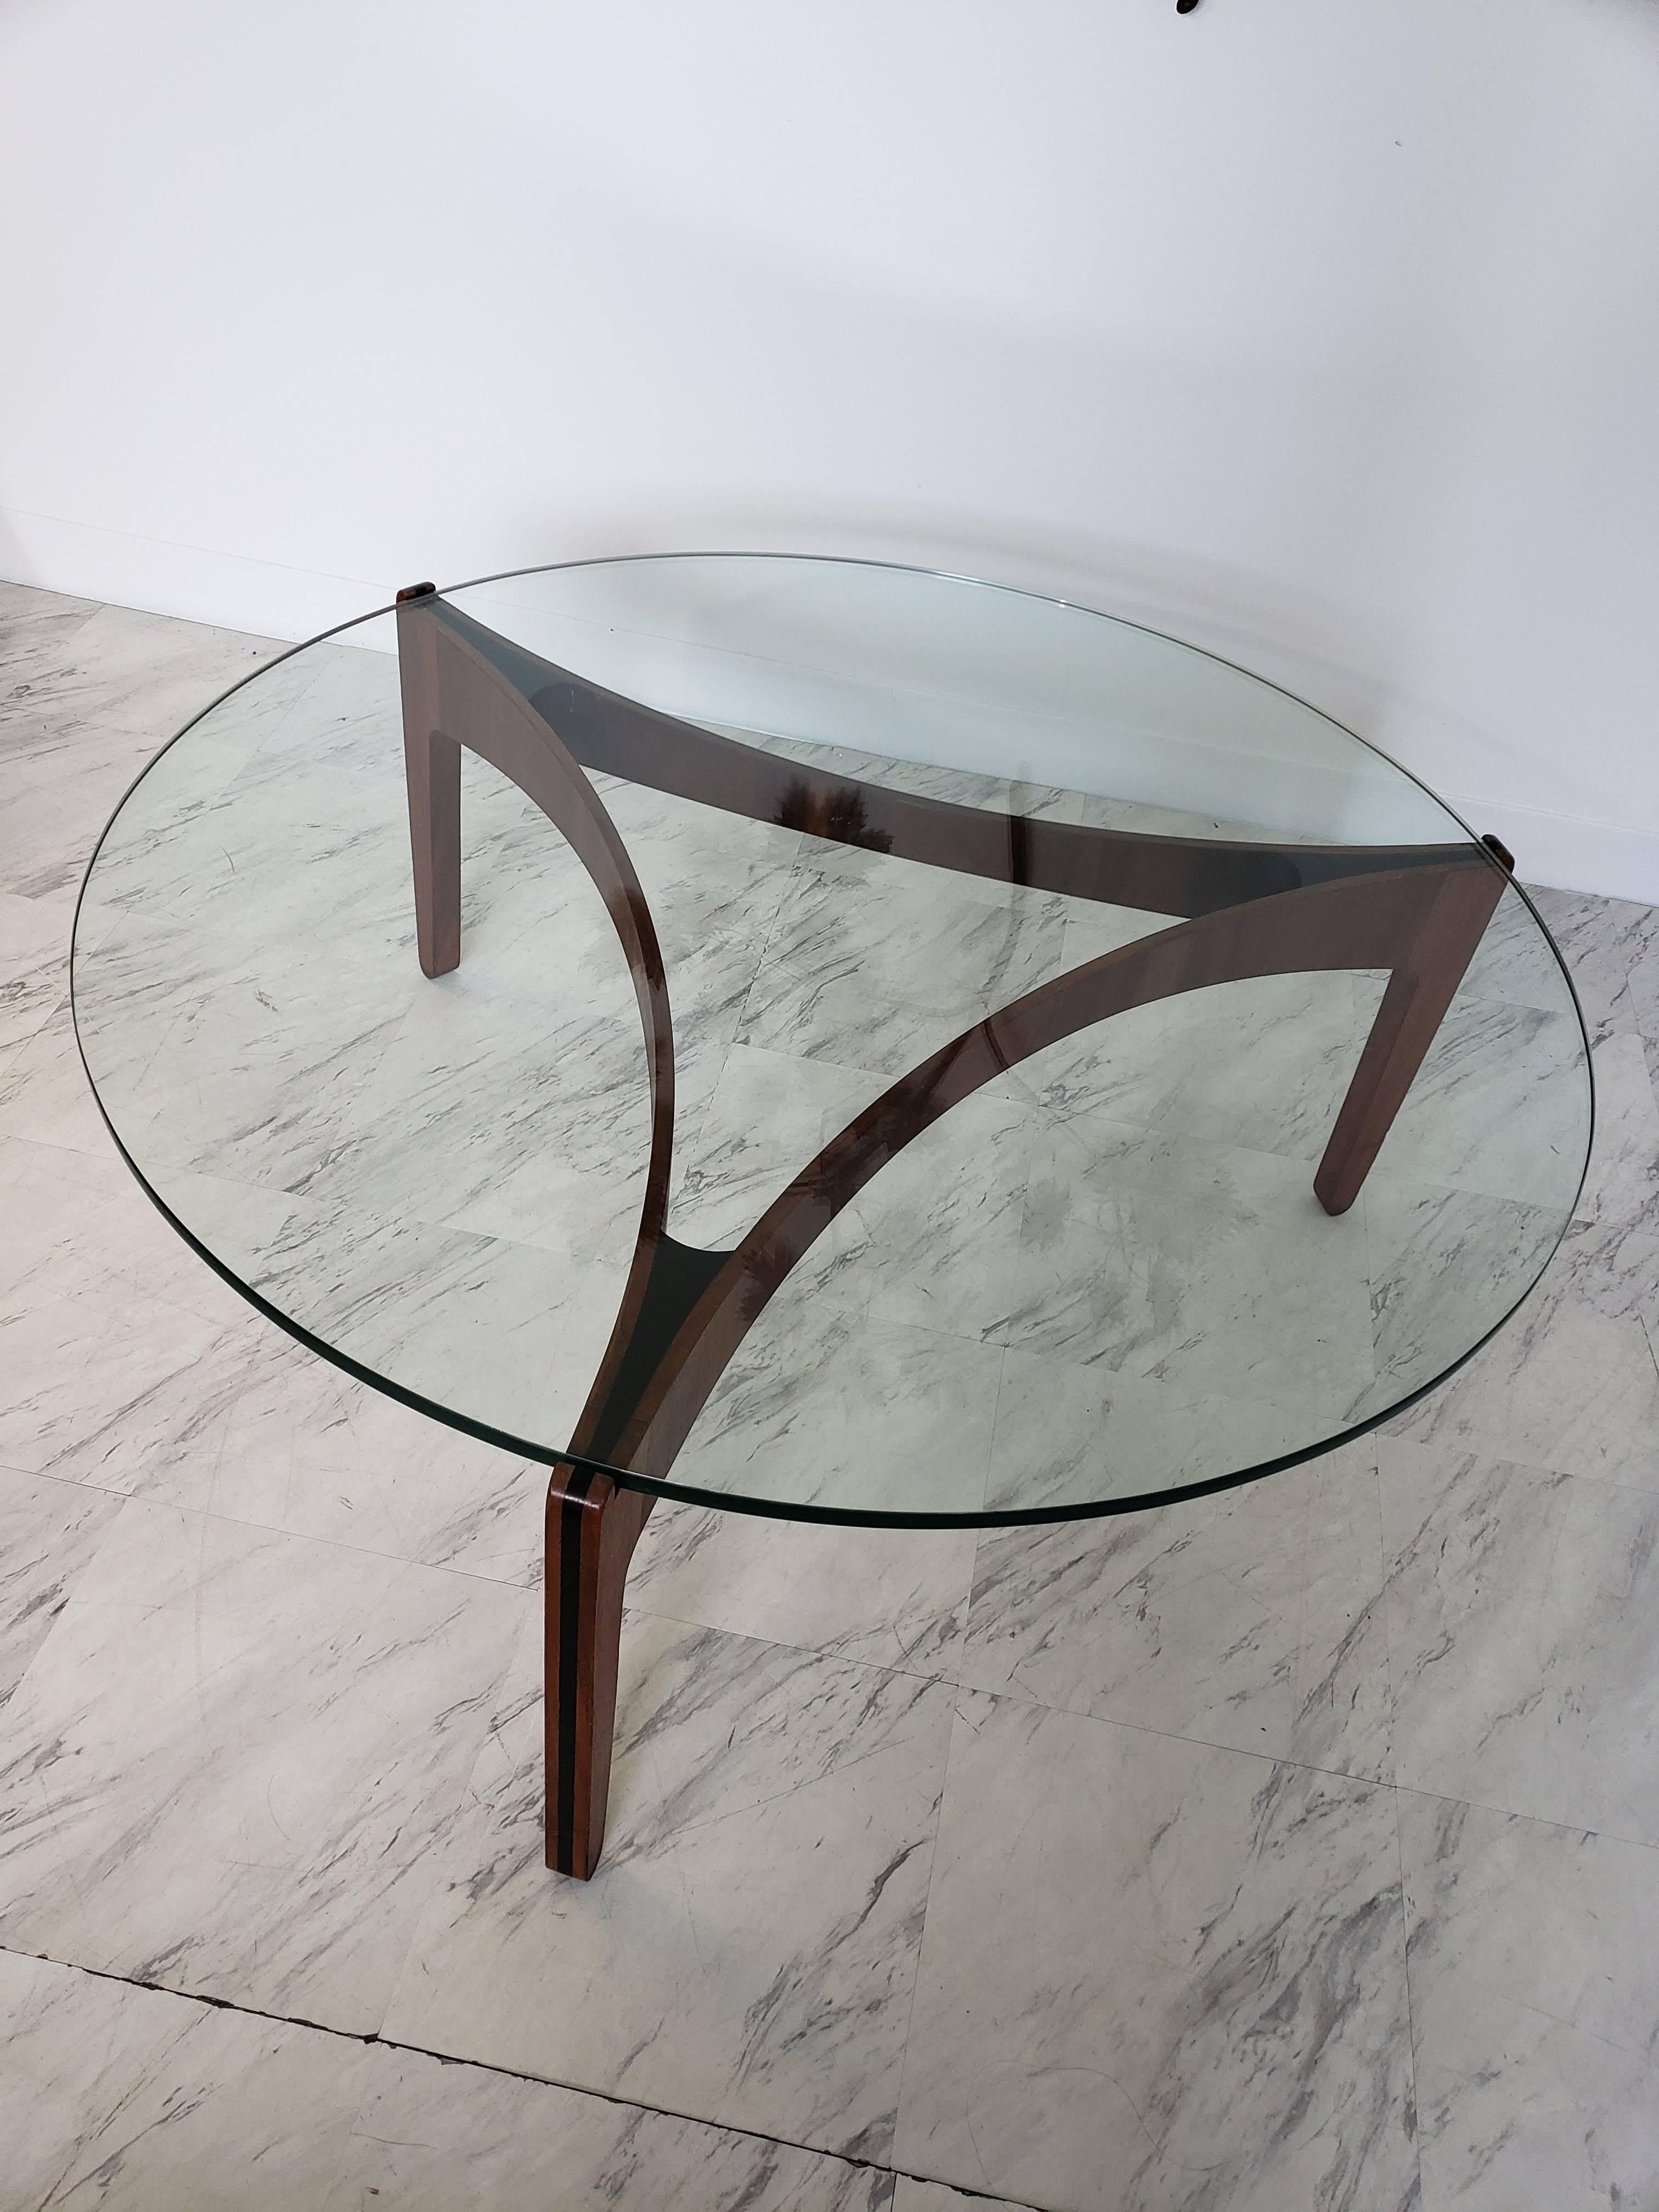 Danish modern coffee table, circa 1960s by Sven Ellekaer by Mobelfabrik. This is a great teak table with clean lines and is in excellent condition. Very sturdy with thick glass. Glass measures 39